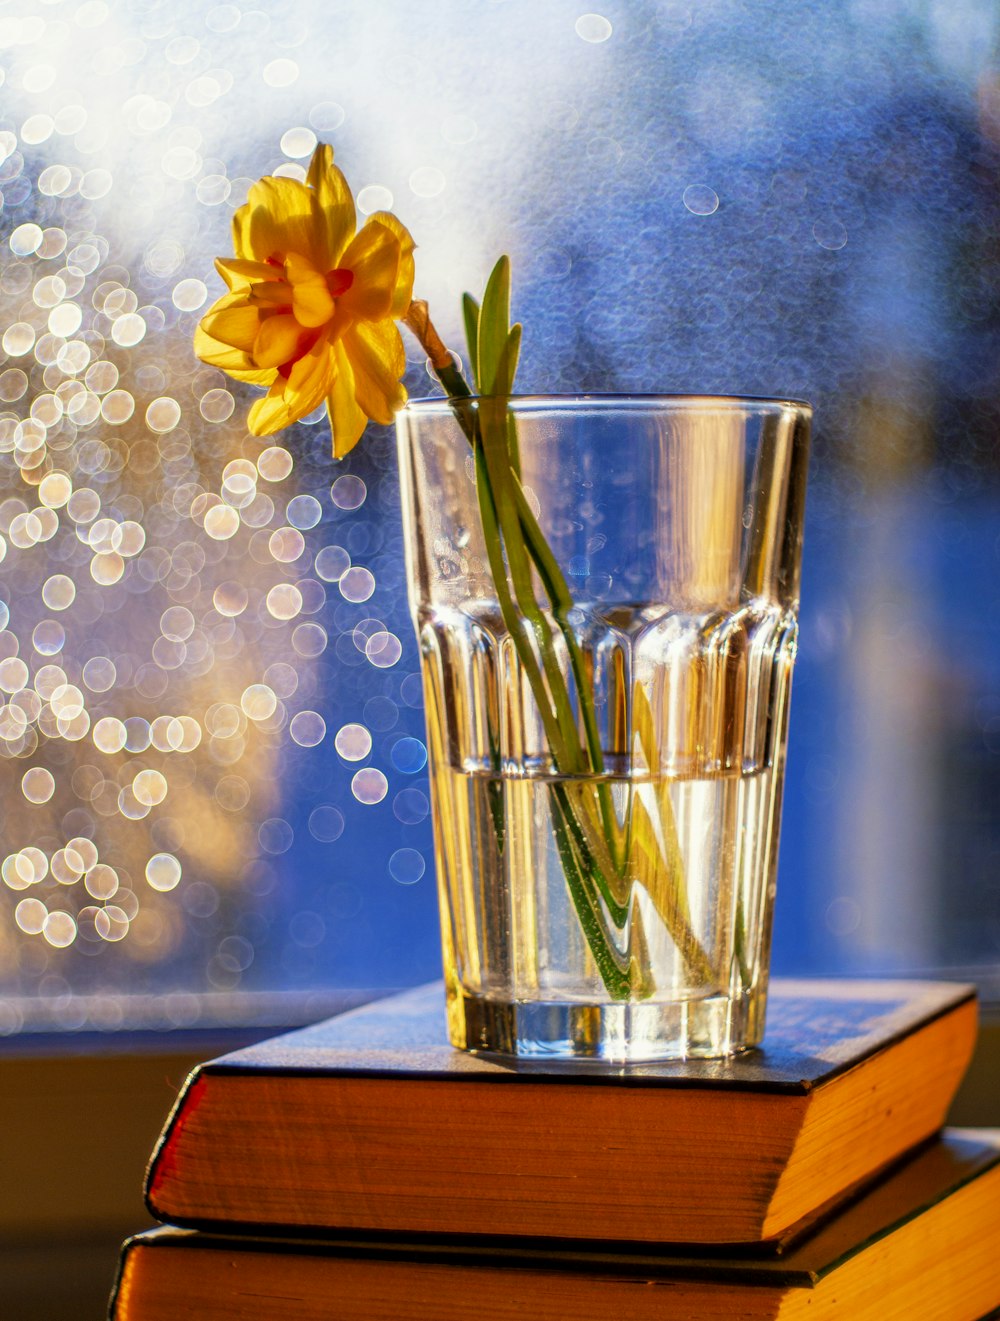 a yellow flower in a glass vase